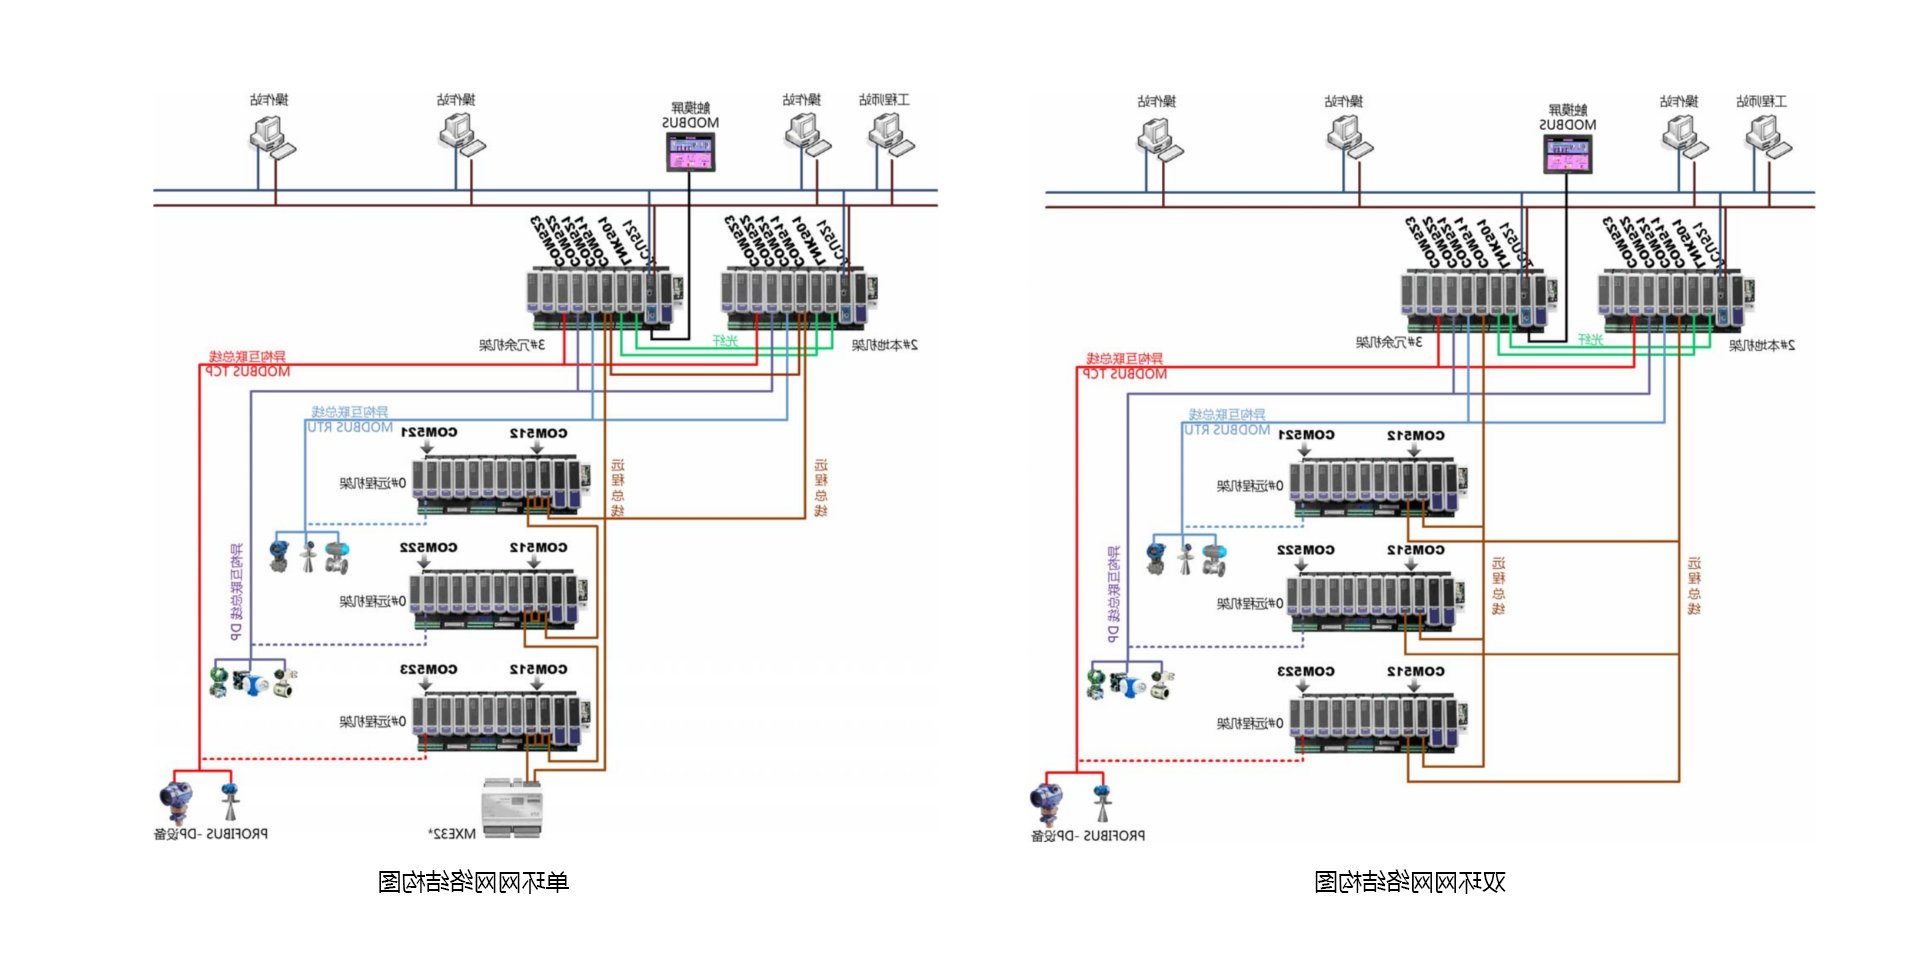 <br>The T5100 equipment and process control optimization system is based on the PLC products independently developed by the company，For non-safety application scenarios, compressor control, steam pipe network balance control and other equipment and process control optimization requirements，增强开发的系统，It is suitable for the optimization of key equipment and process control in the control layer。T5100 equipment and process control optimization system includes compressor optimization control and steam pipe network balance control。Compressor optimization control adopts internationally advanced compressor control algorithm technology, including anti-surge control, performance control, speed control, steam extraction control and other unit optimization control technology, suitable for centrifugal and axial flow compressor control applications in process enterprises under non-safety requirements。Steam pipe network balance control adopts self-developed pipe network balance control technology, which is suitable for petrochemical and chemical enterprises to realize automatic control of steam pipe network system and improve the intelligent level。